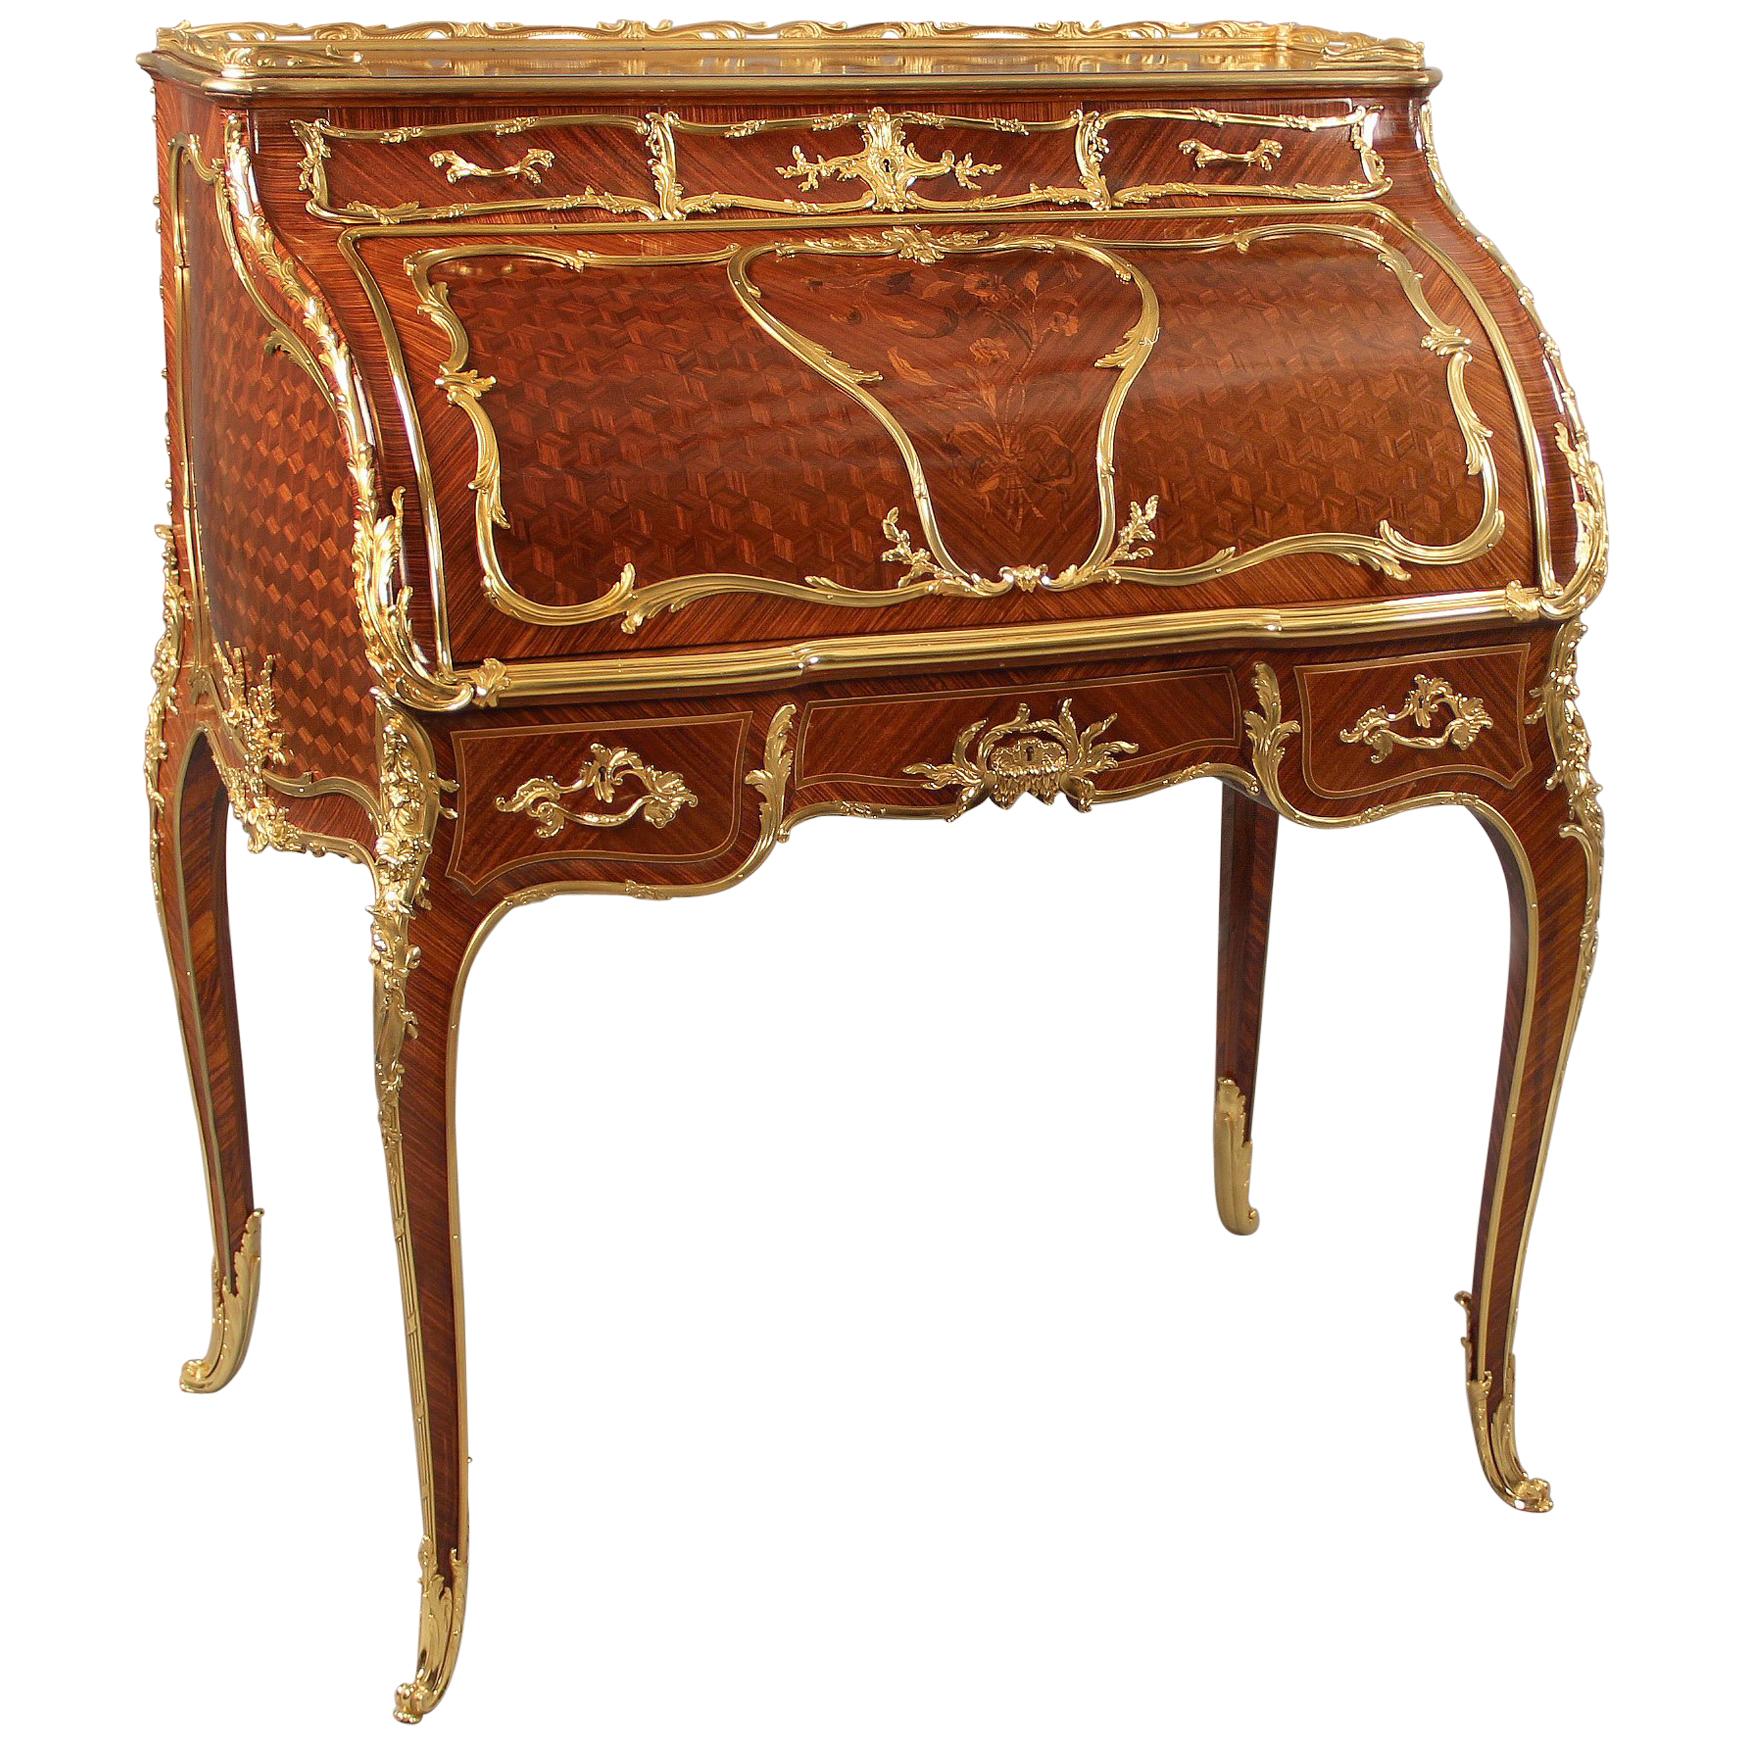 Late 19th Century Marquetry and Parquetry Bureau a Cylindre by François Linke For Sale